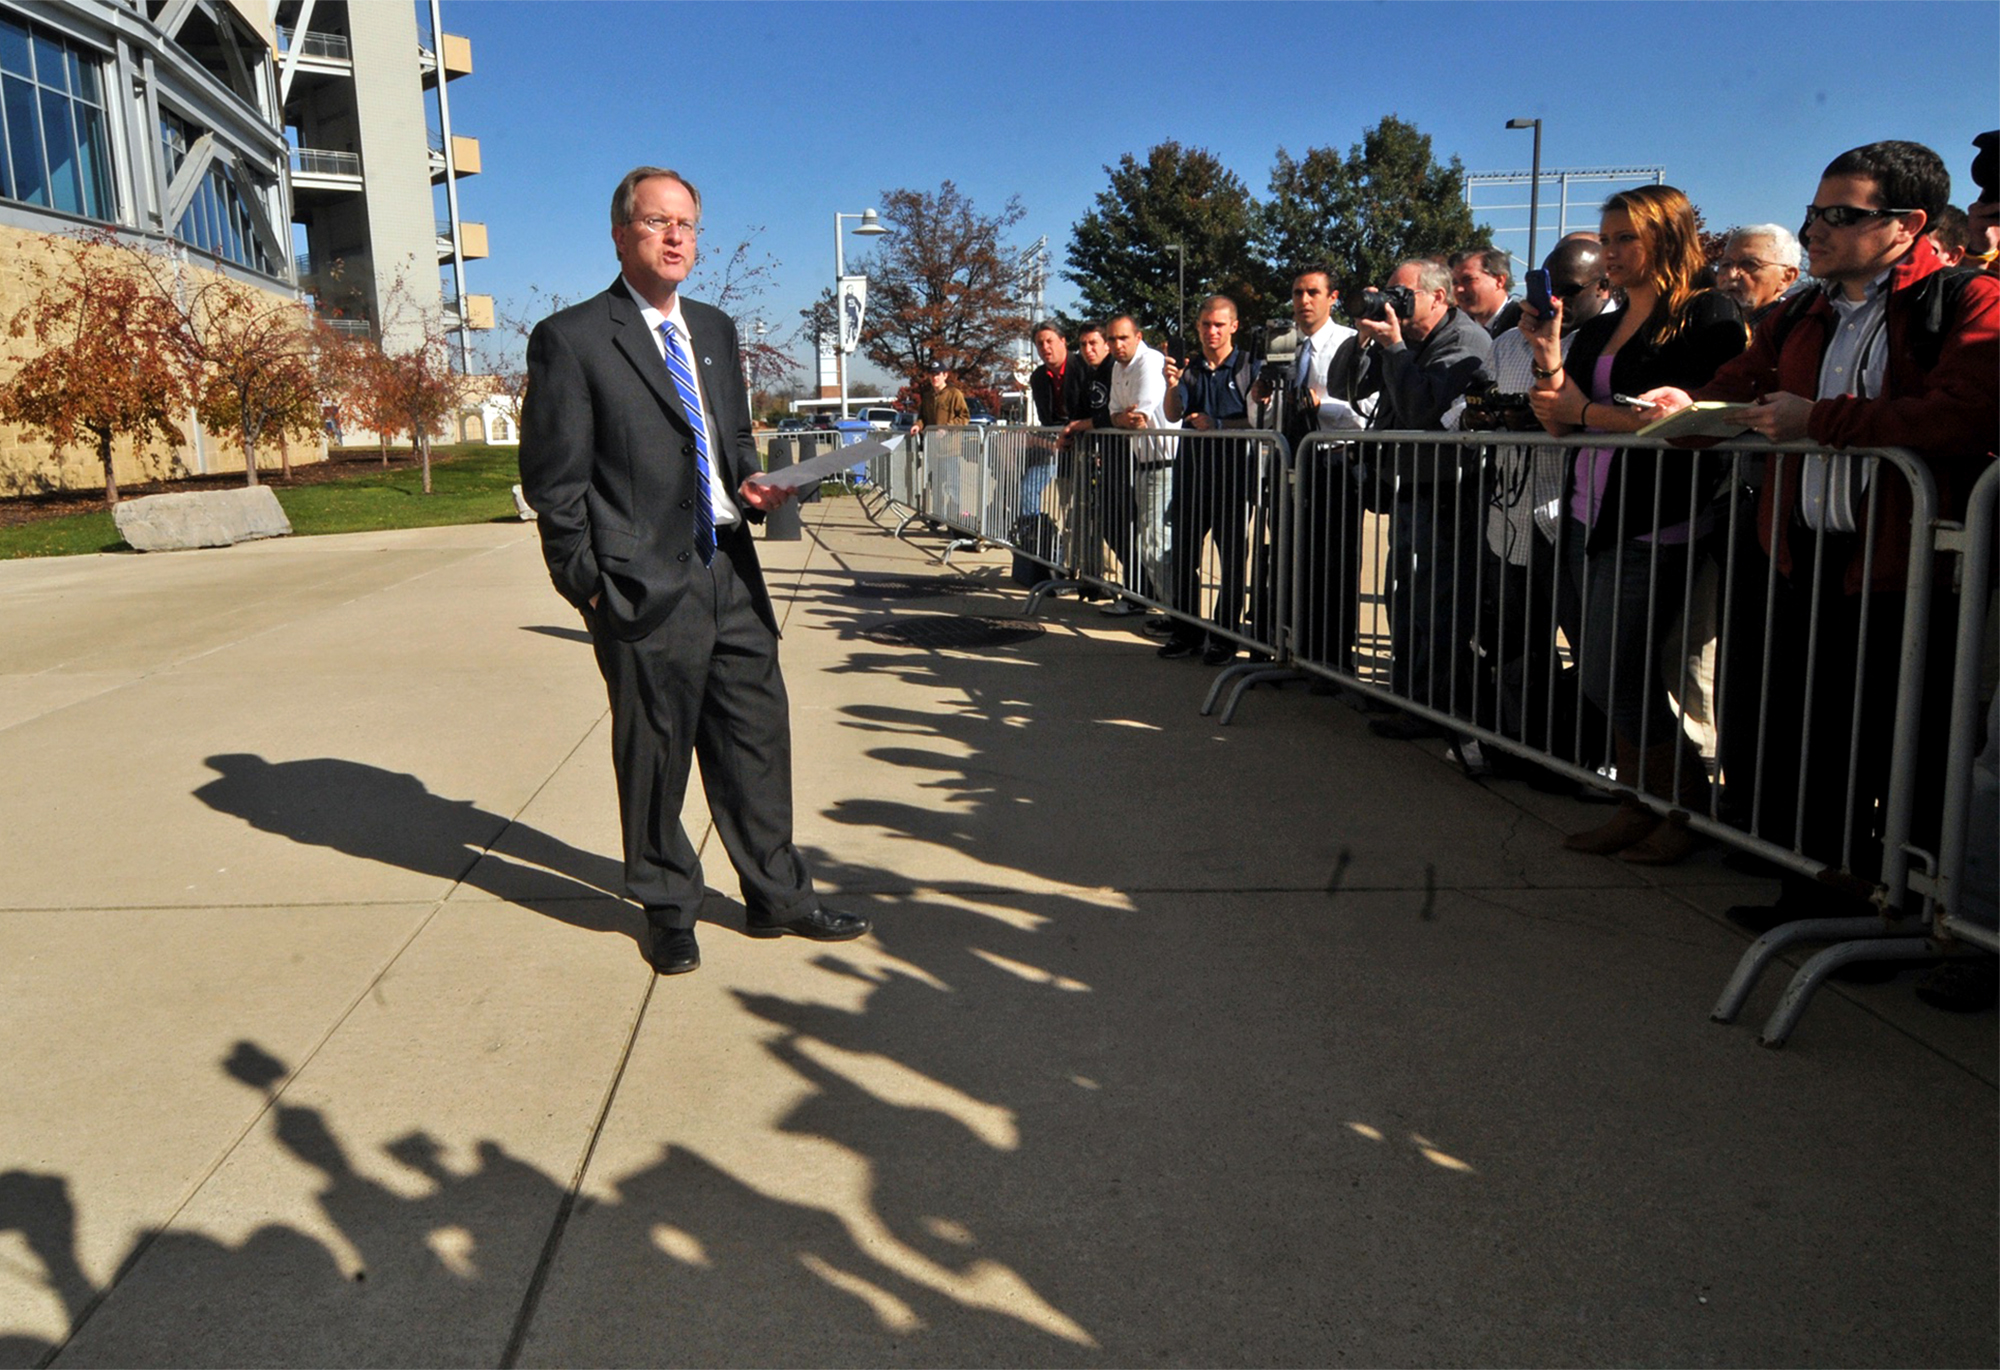  Penn State Sports Information Director Jeff Nelson issues a verbal and written statement to the media just before noon on November 11, 2011 outside of Beaver Stadium saying that "Due to the on-going legal circumstances centered around the recent all